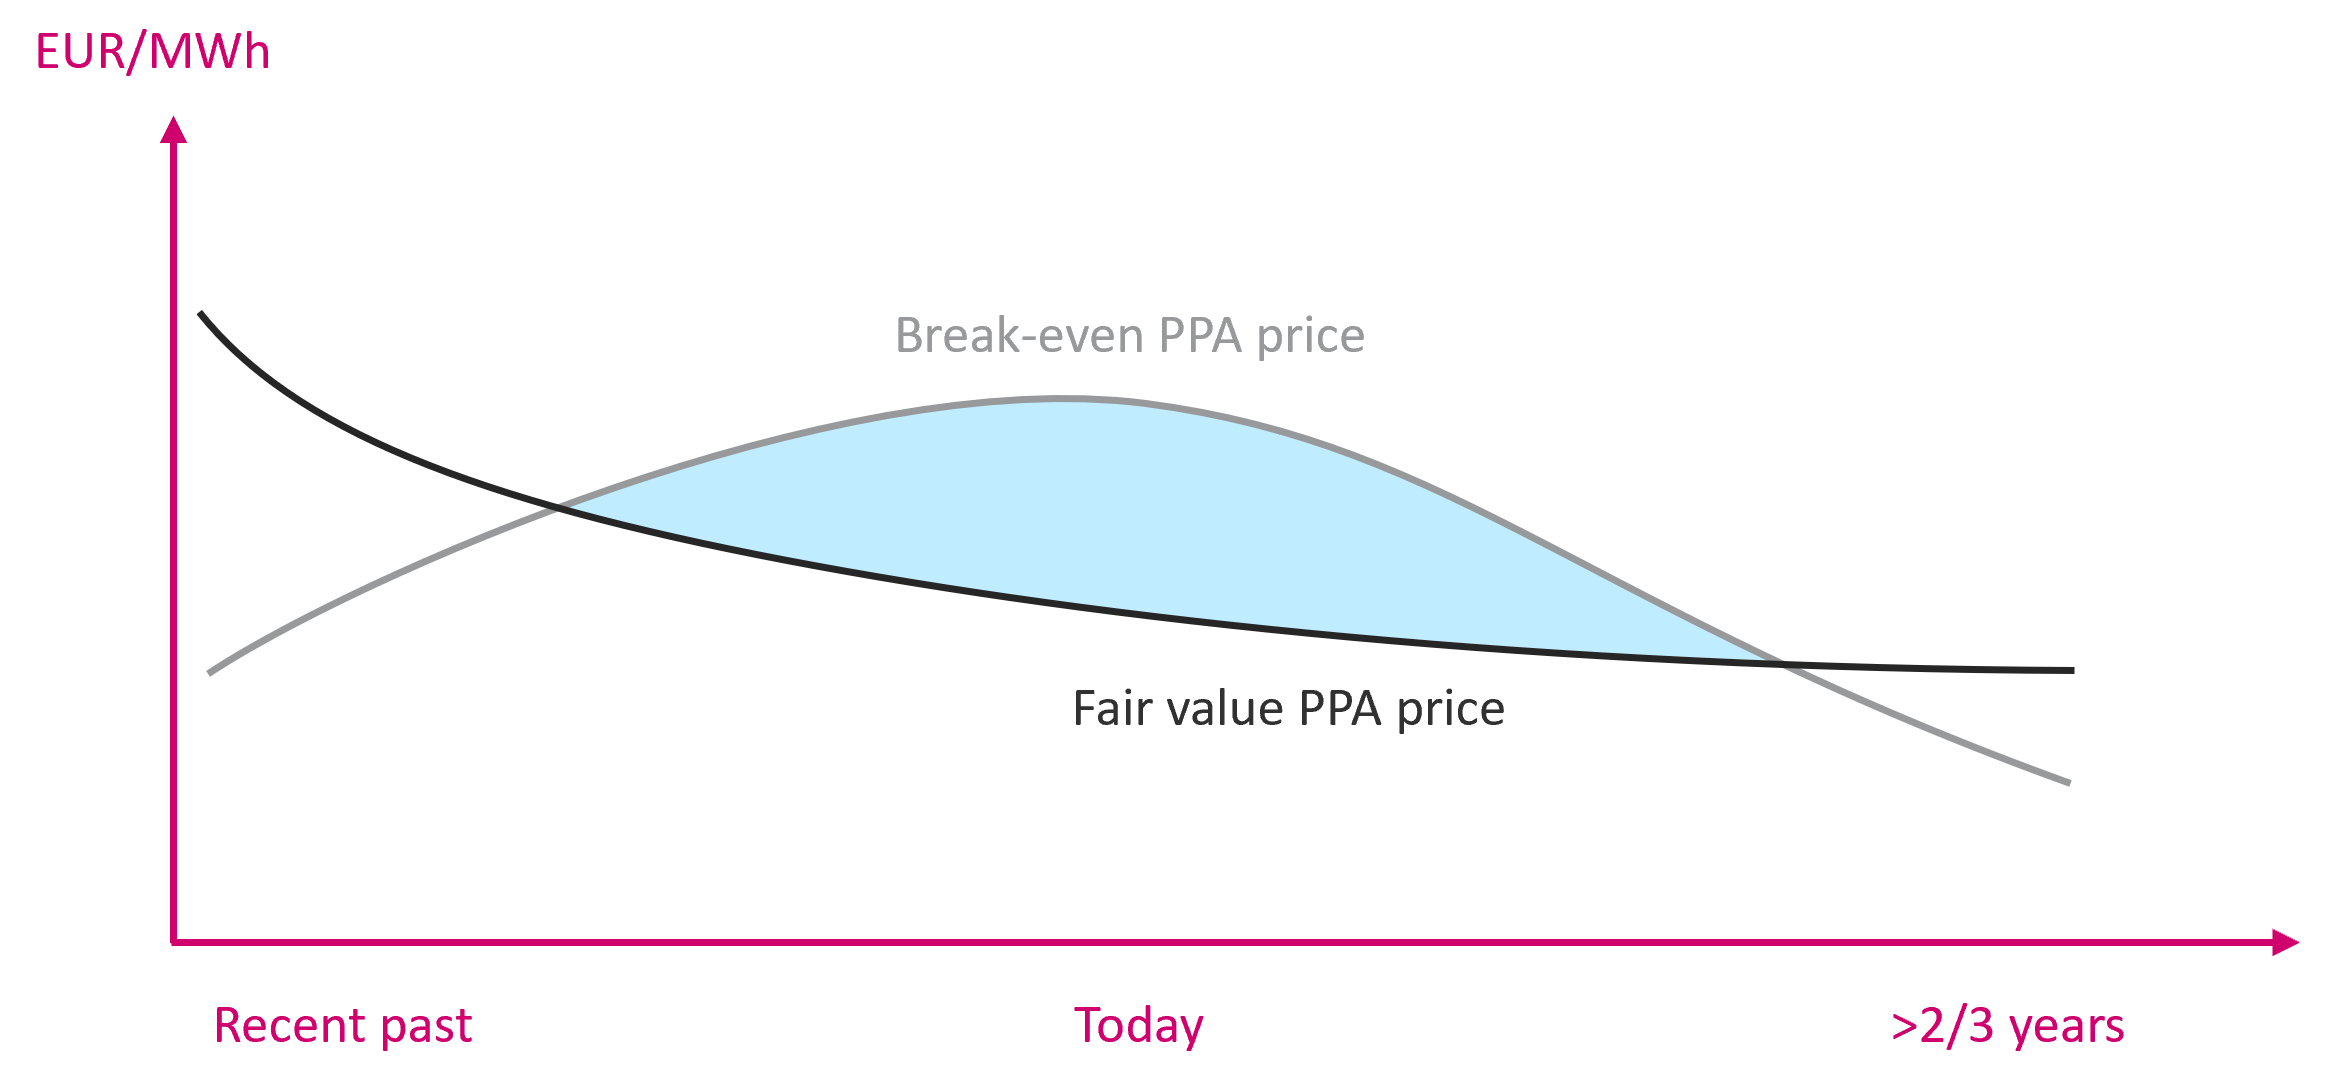 Evolution of PPA break-even prices and Fair value PPA prices